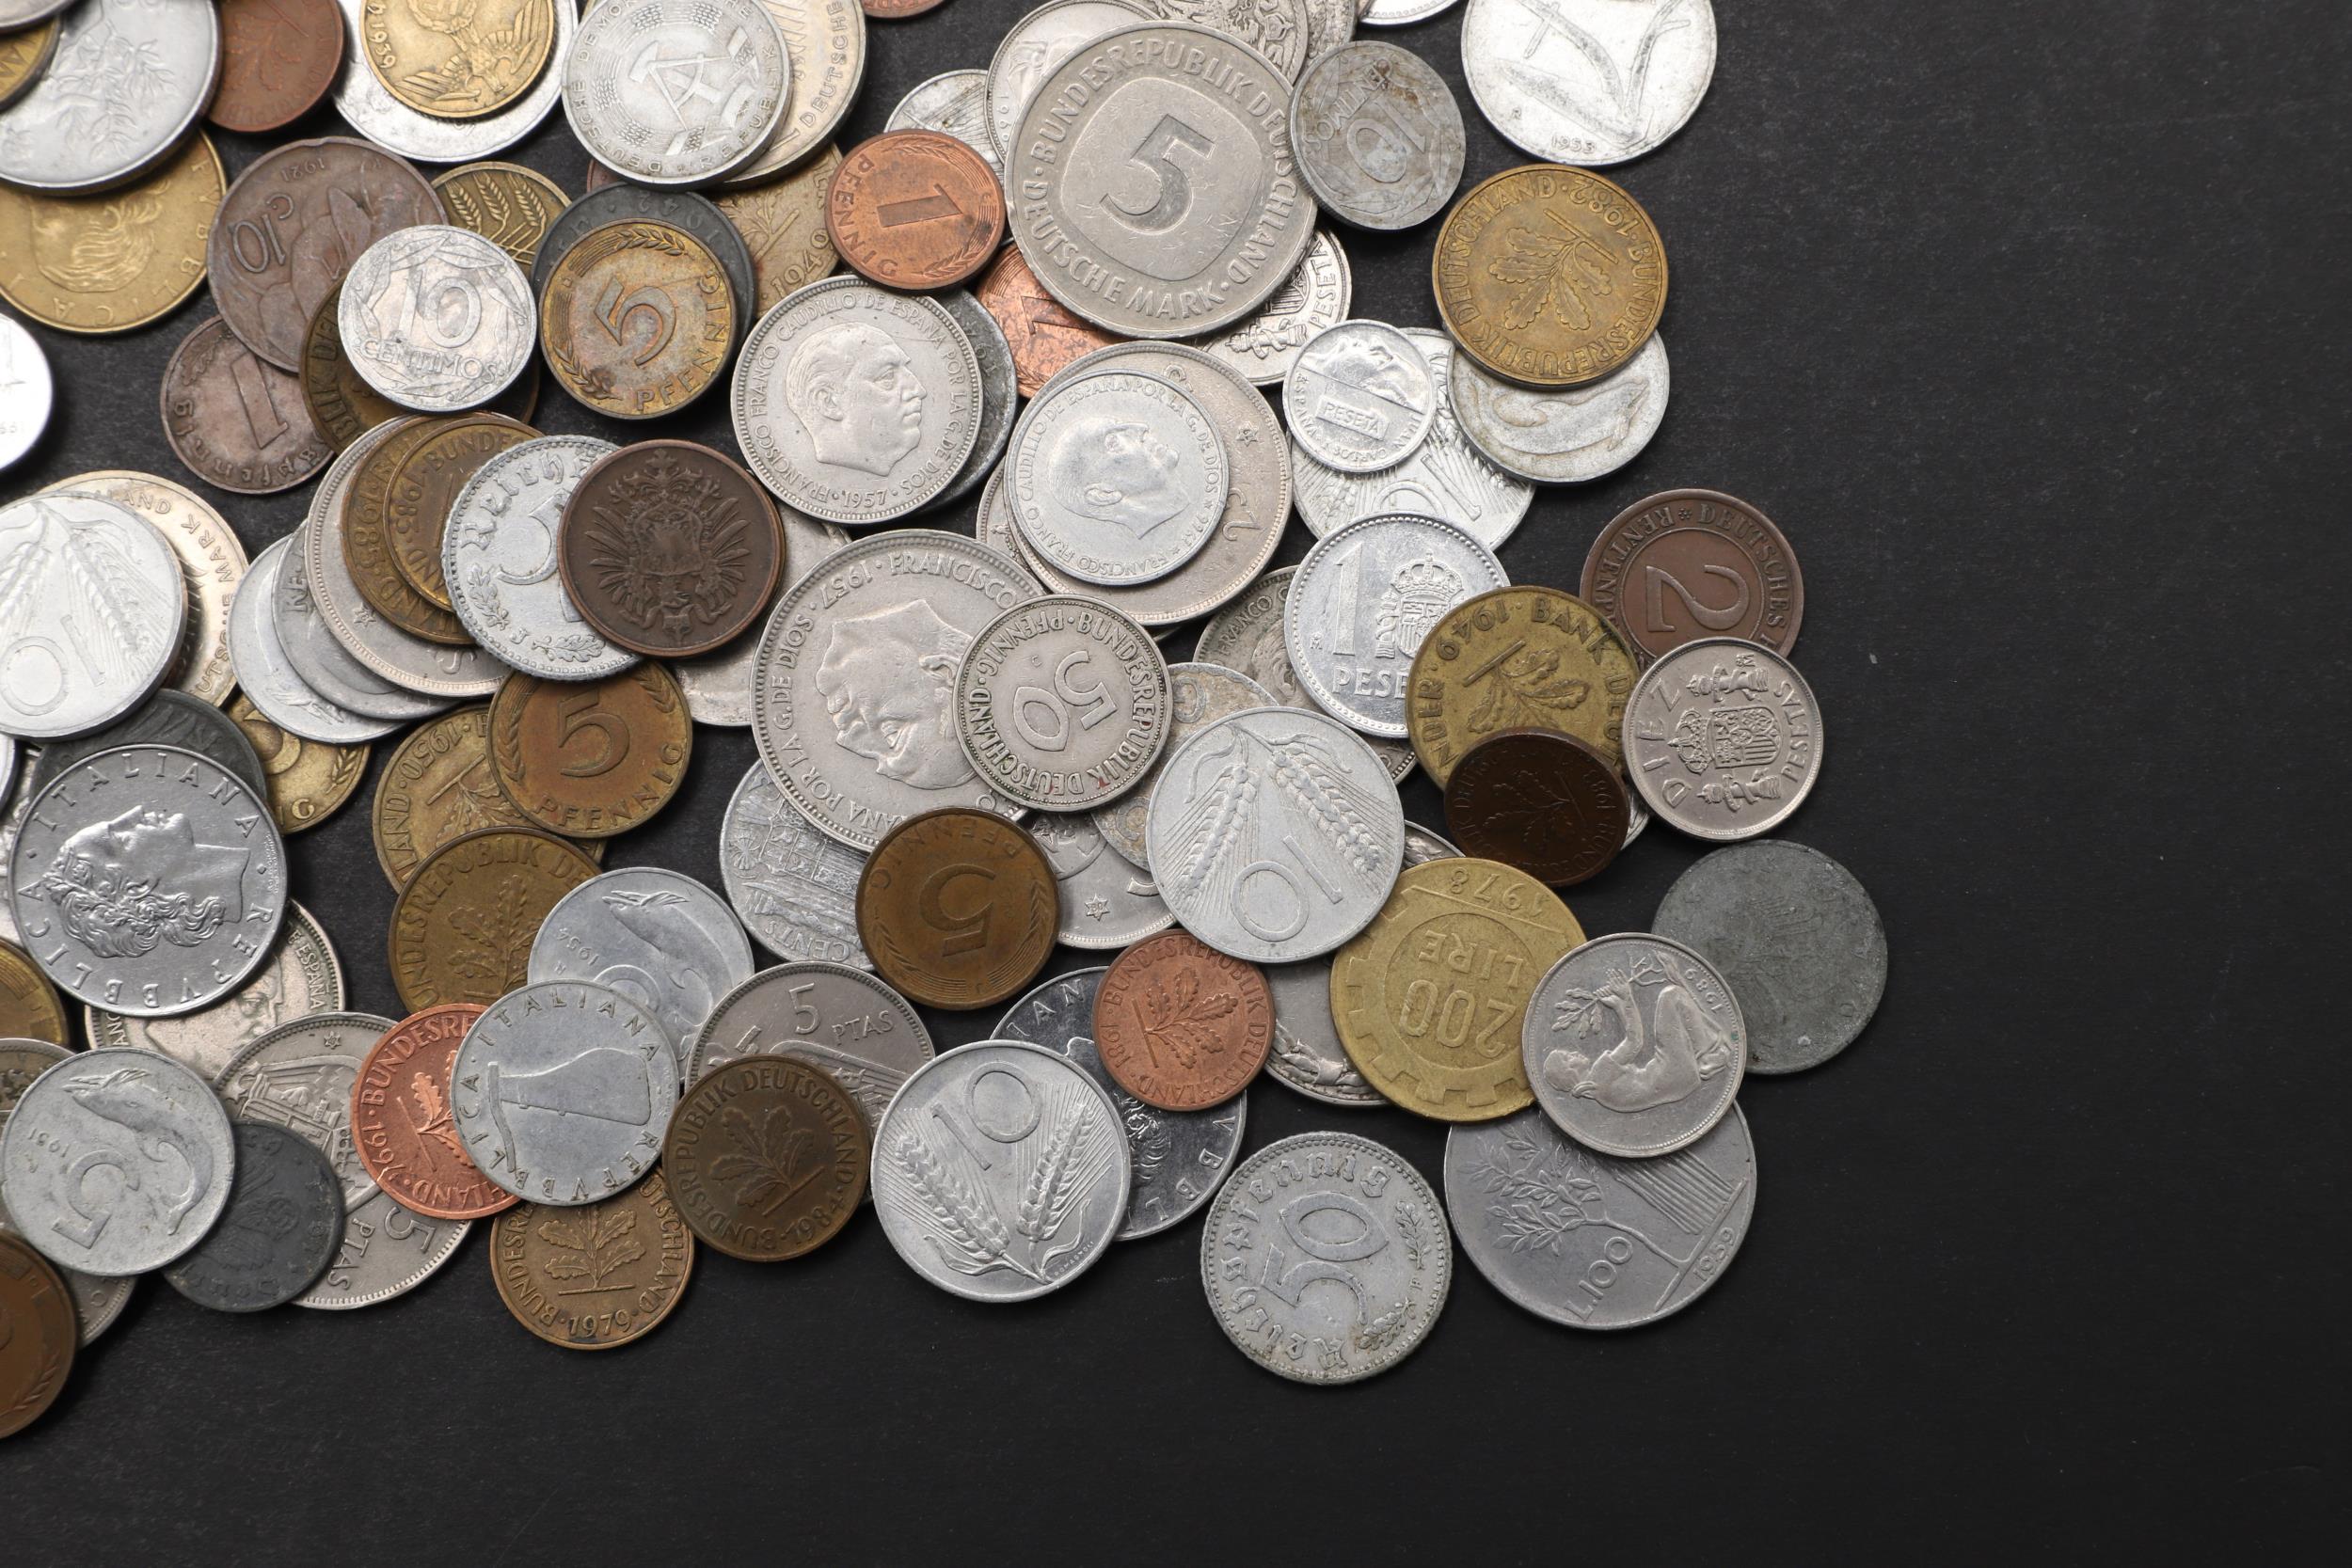 A LARGE COLLECTION OF 19TH AND 20th CENTURY EUROPEAN COINS TO INCLUDE GERMANY, SPAIN AND ITALY. - Image 10 of 10